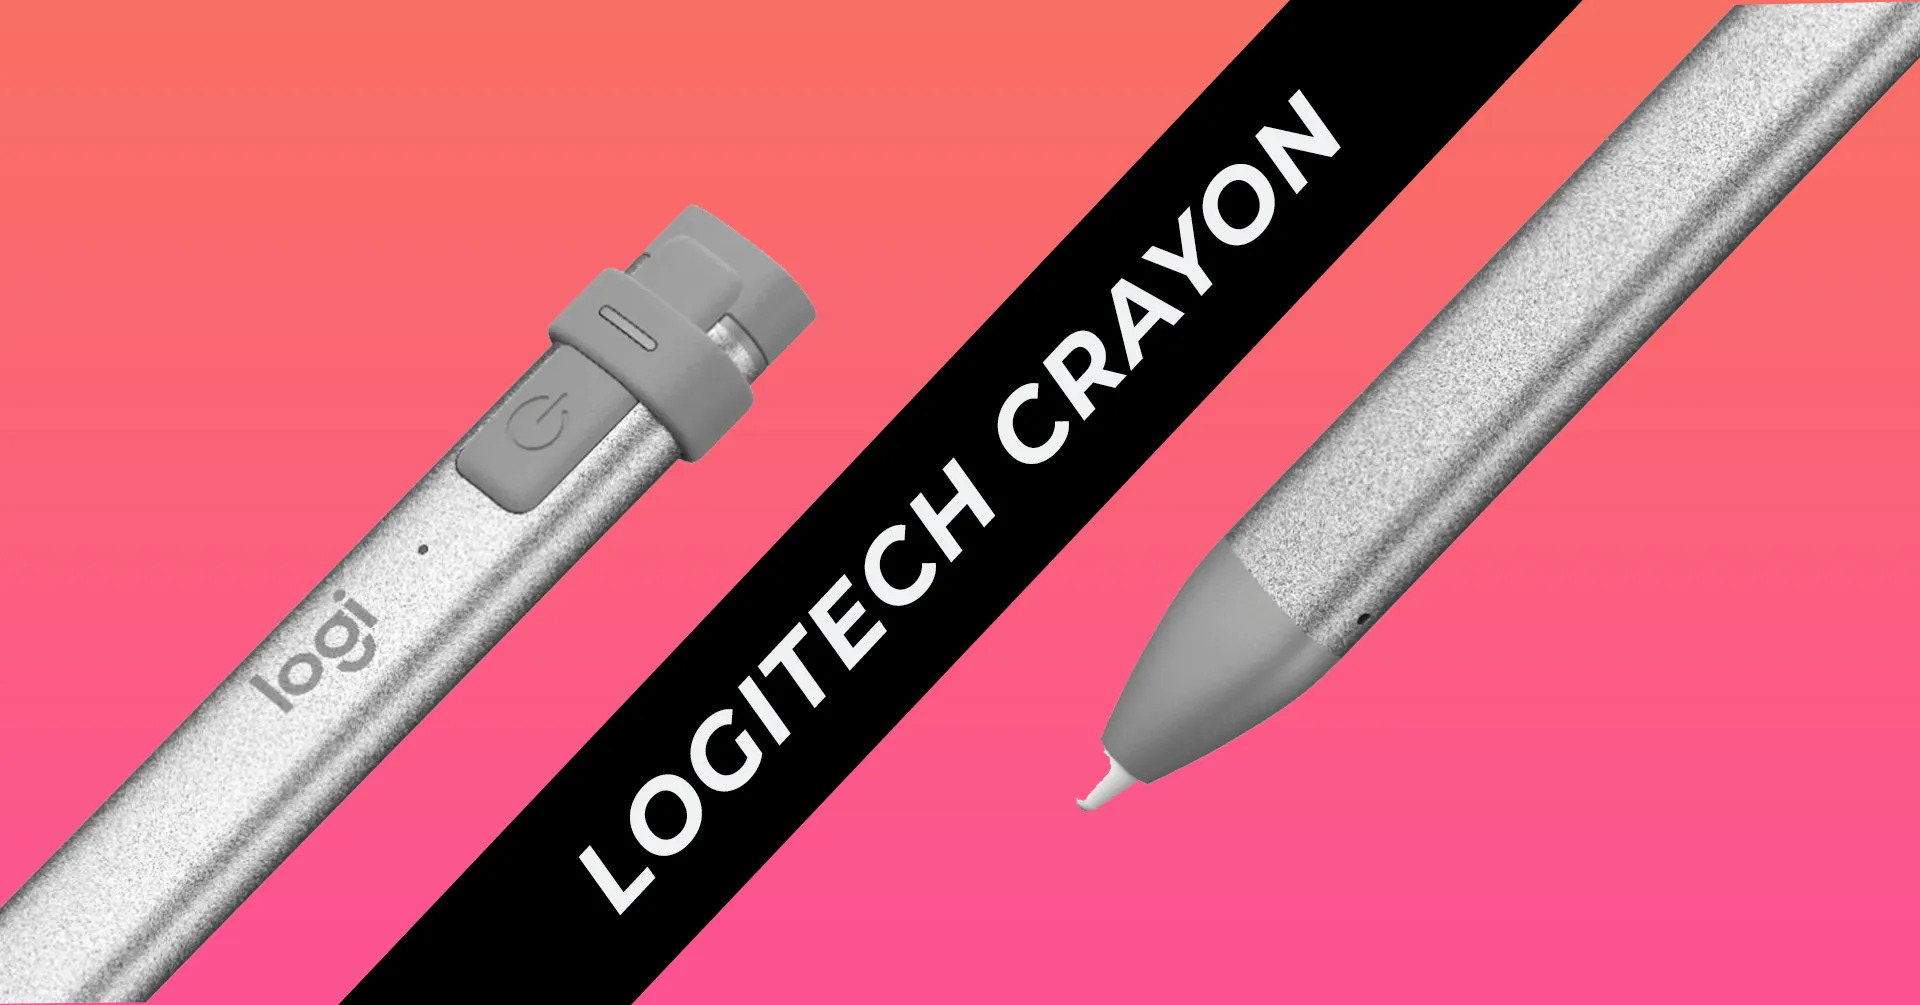 How Do I Know When My Logitech Crayon Is Fully Charged